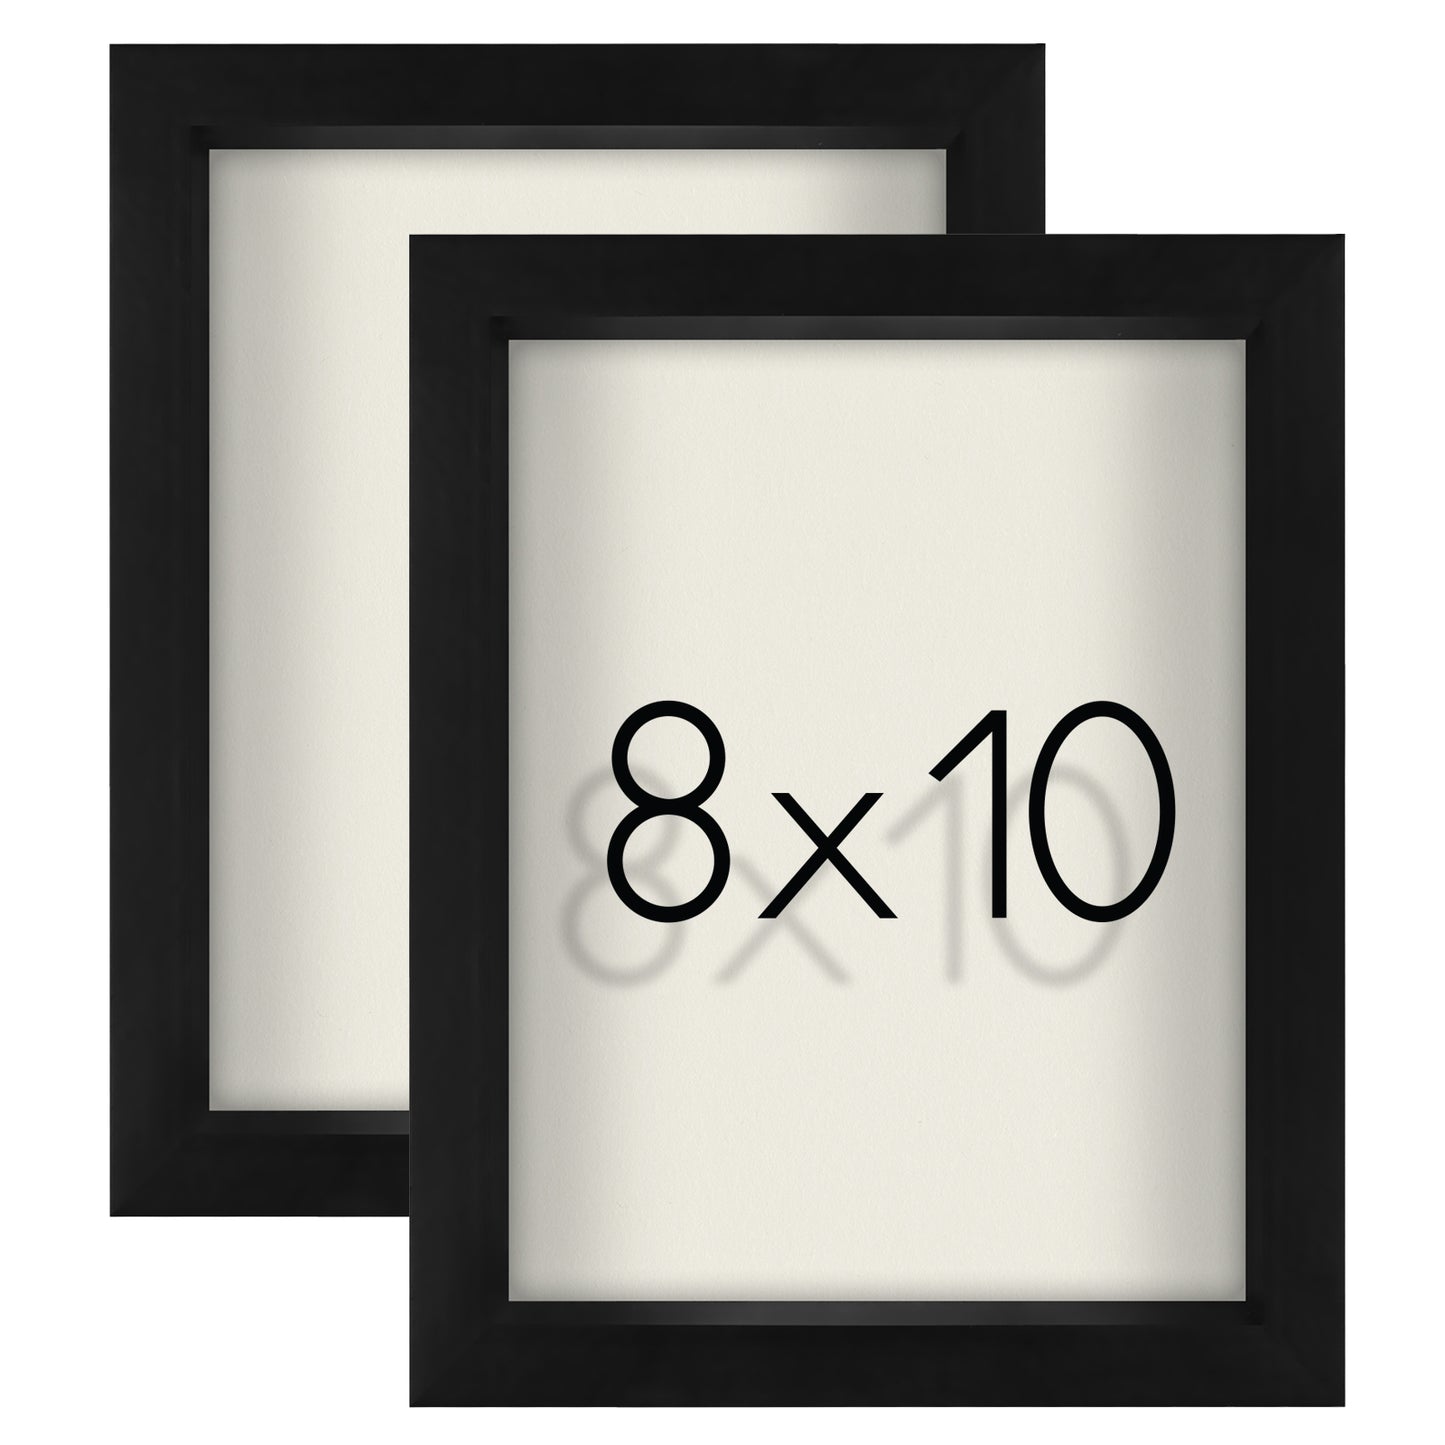 Shadow Box Frame - Set of 2 - in Black with Soft Linen Back - Engineered Wood for Wall and Tabletop